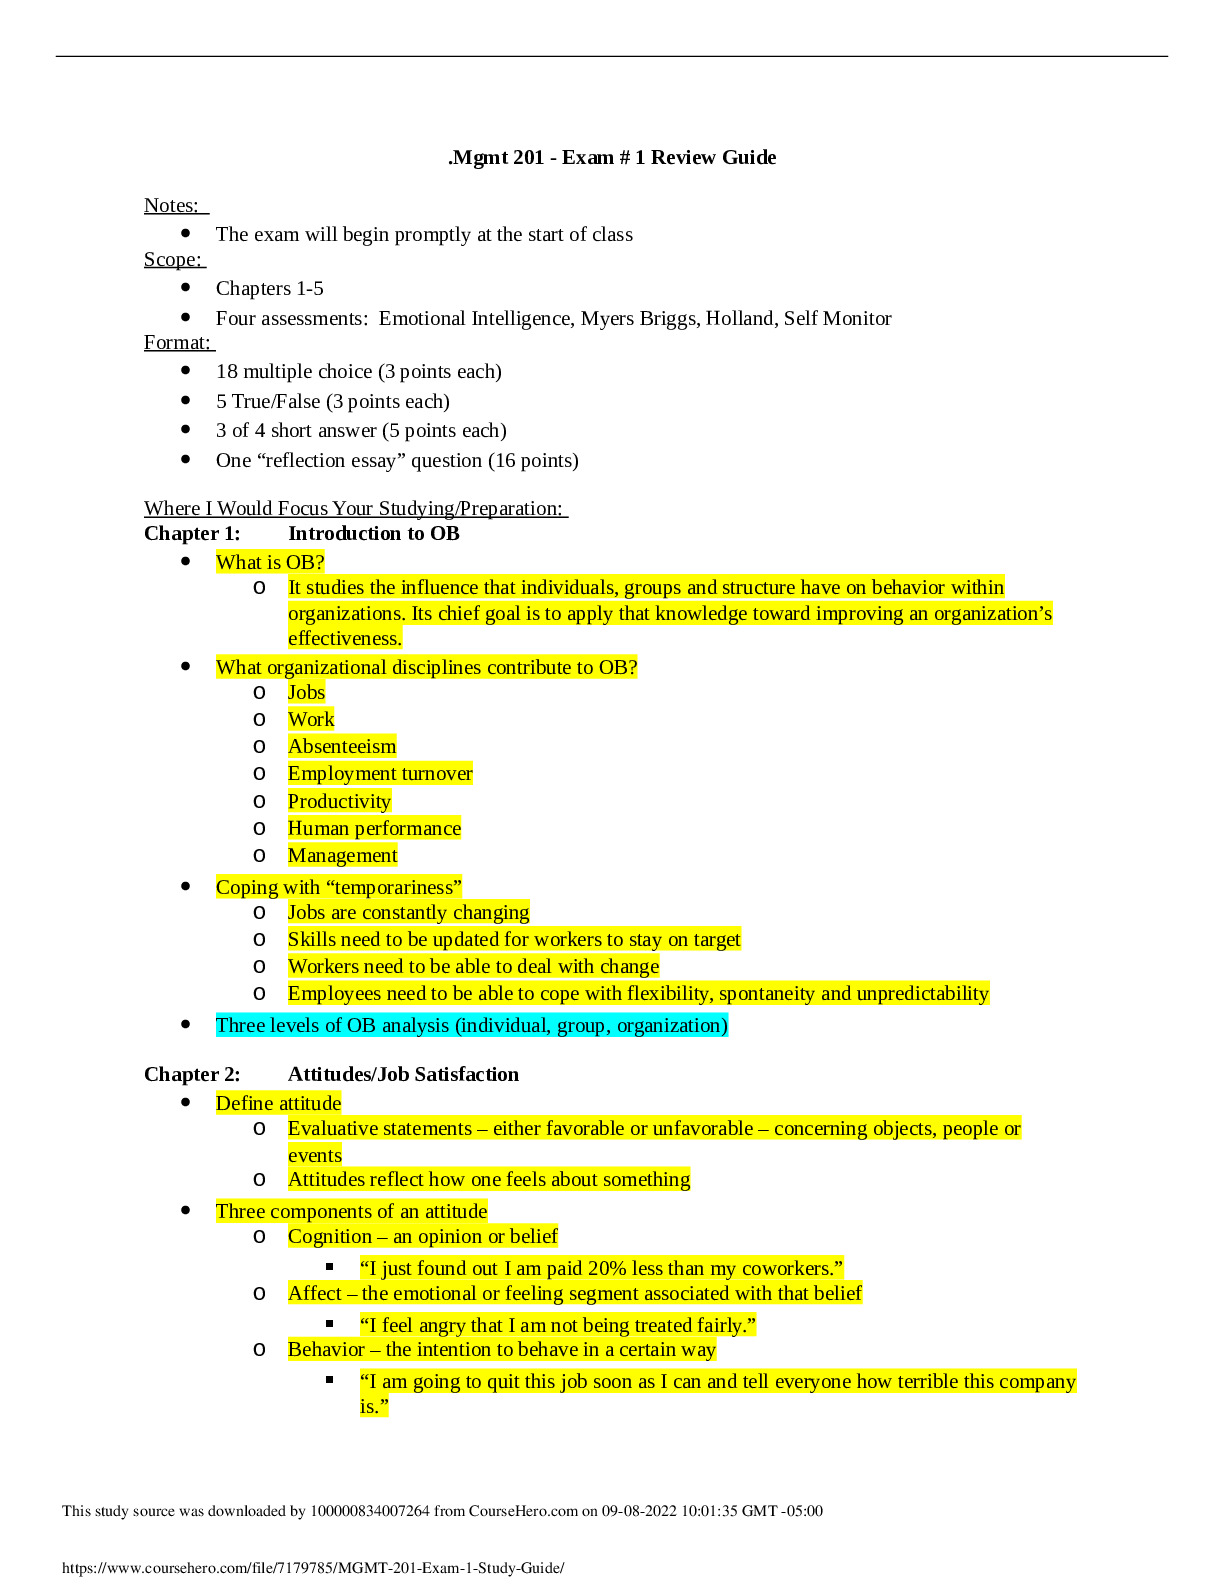 MGMT_201_Exam__1_Study_Guide